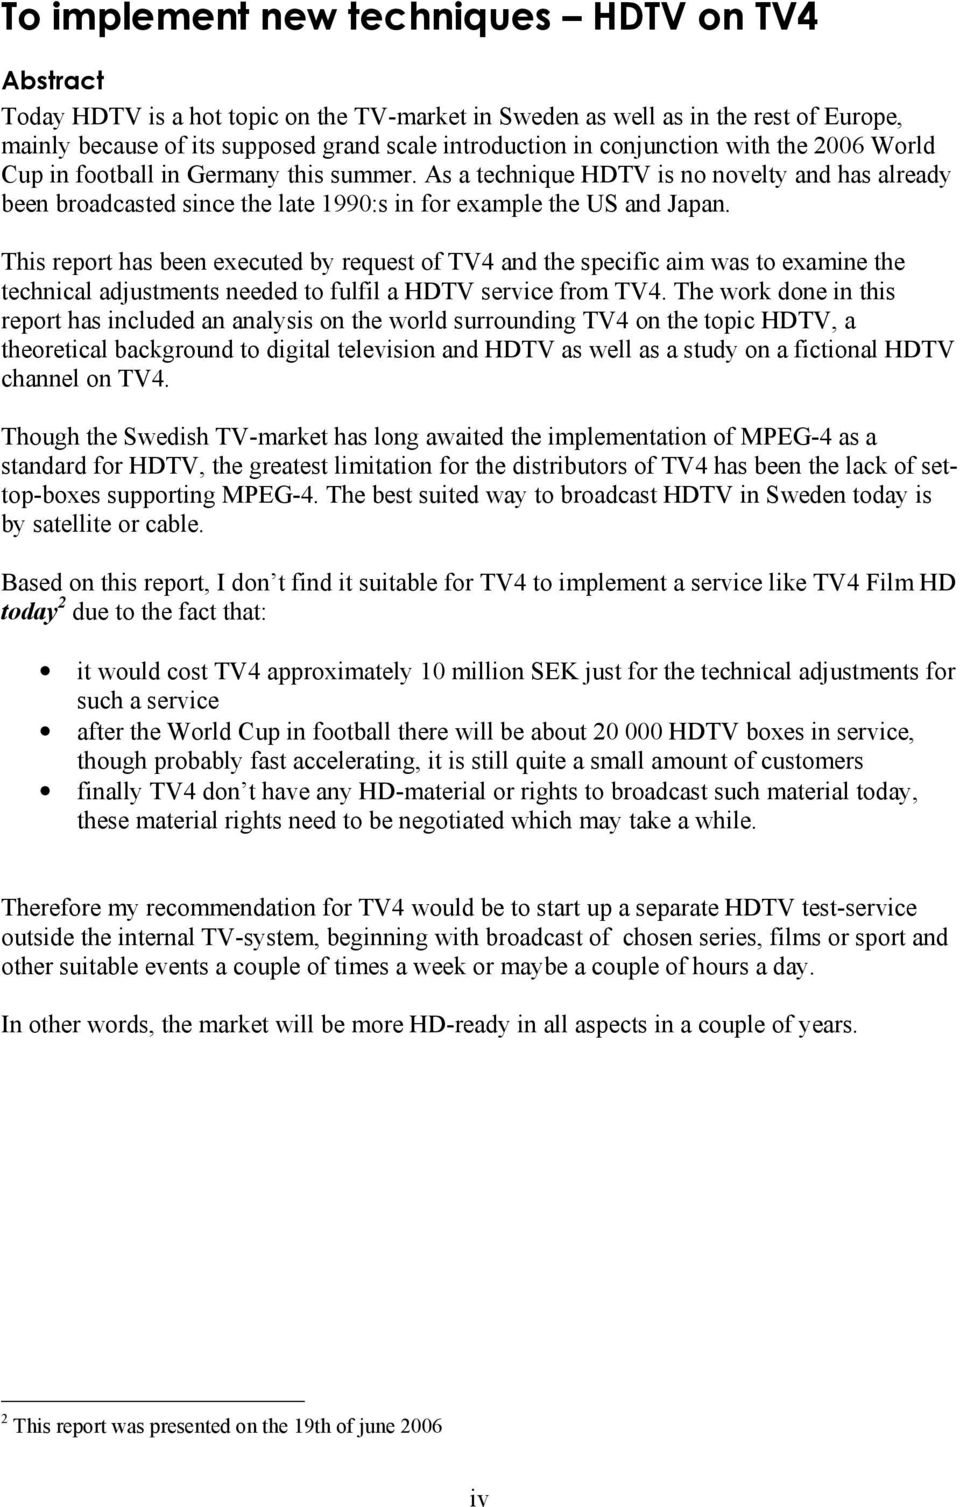 This report has been executed by request of TV4 and the specific aim was to examine the technical adjustments needed to fulfil a HDTV service from TV4.